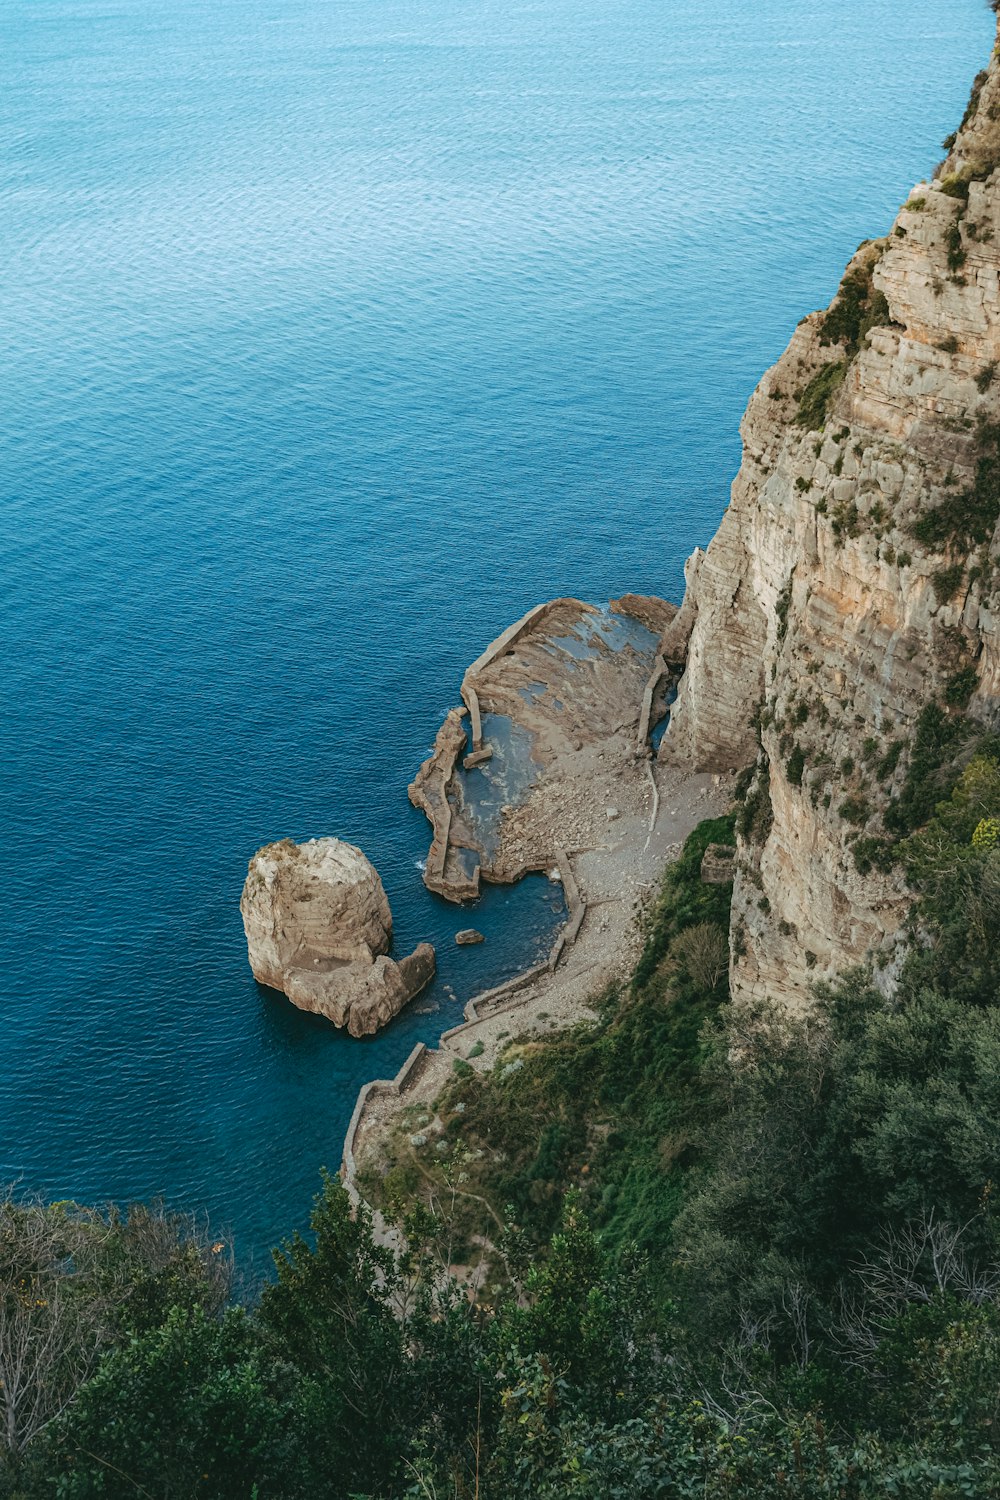 a rocky cliff overlooking a body of water